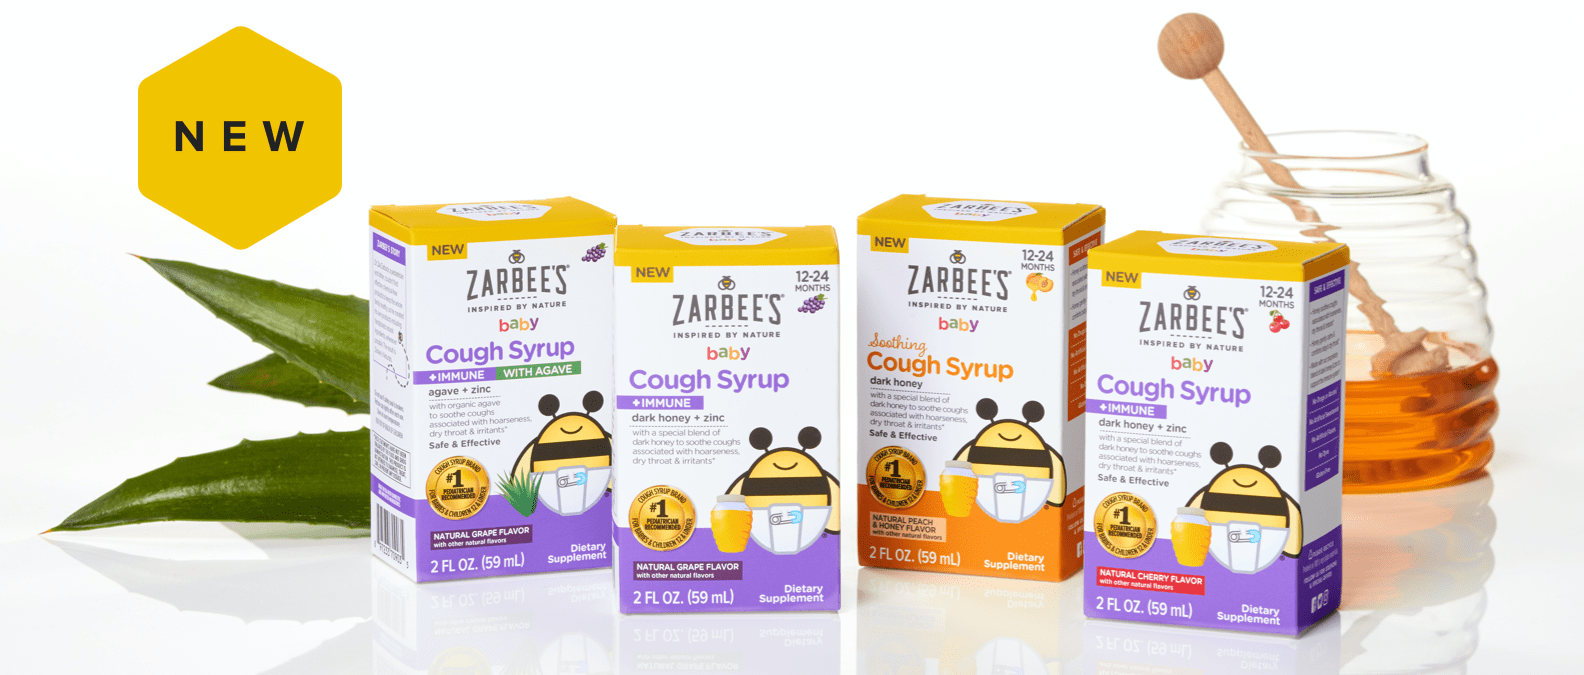 Image of Zarbee’s new cough product line